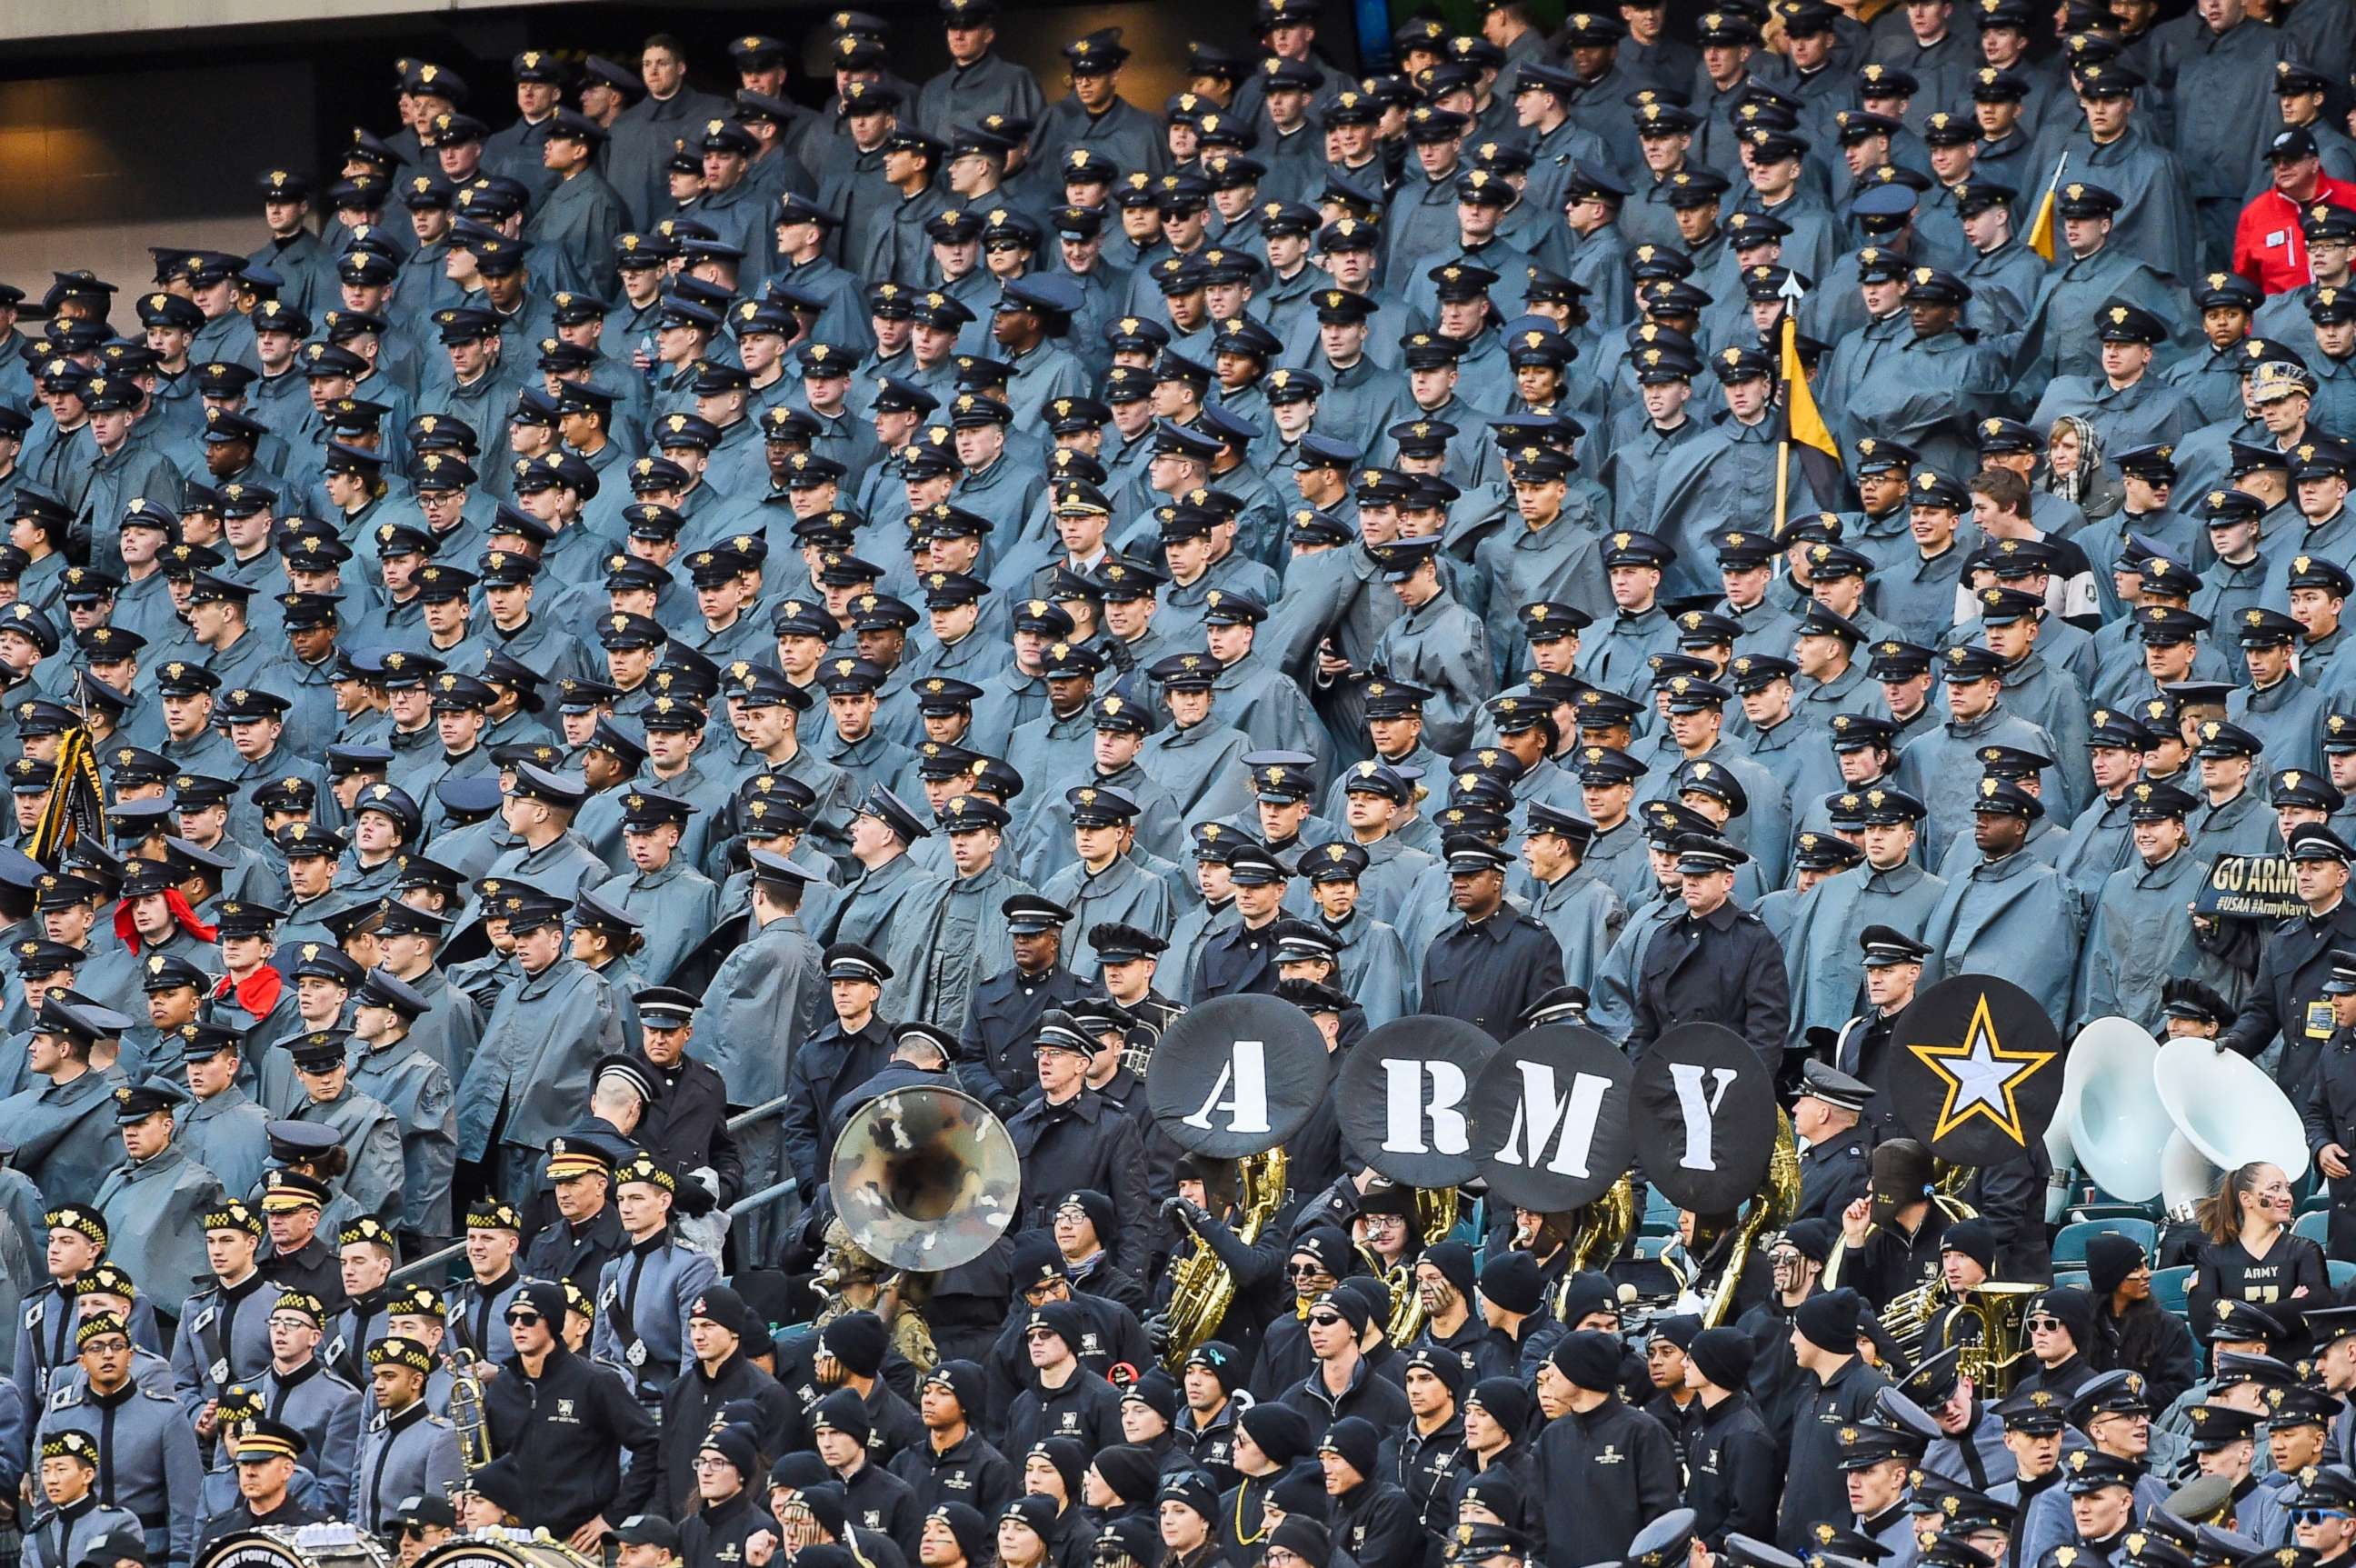 PHOTO: Army Black Knights band performs during the Army-Navy game on December 14, 2019 at Lincoln Financial Field in Philadelphia.